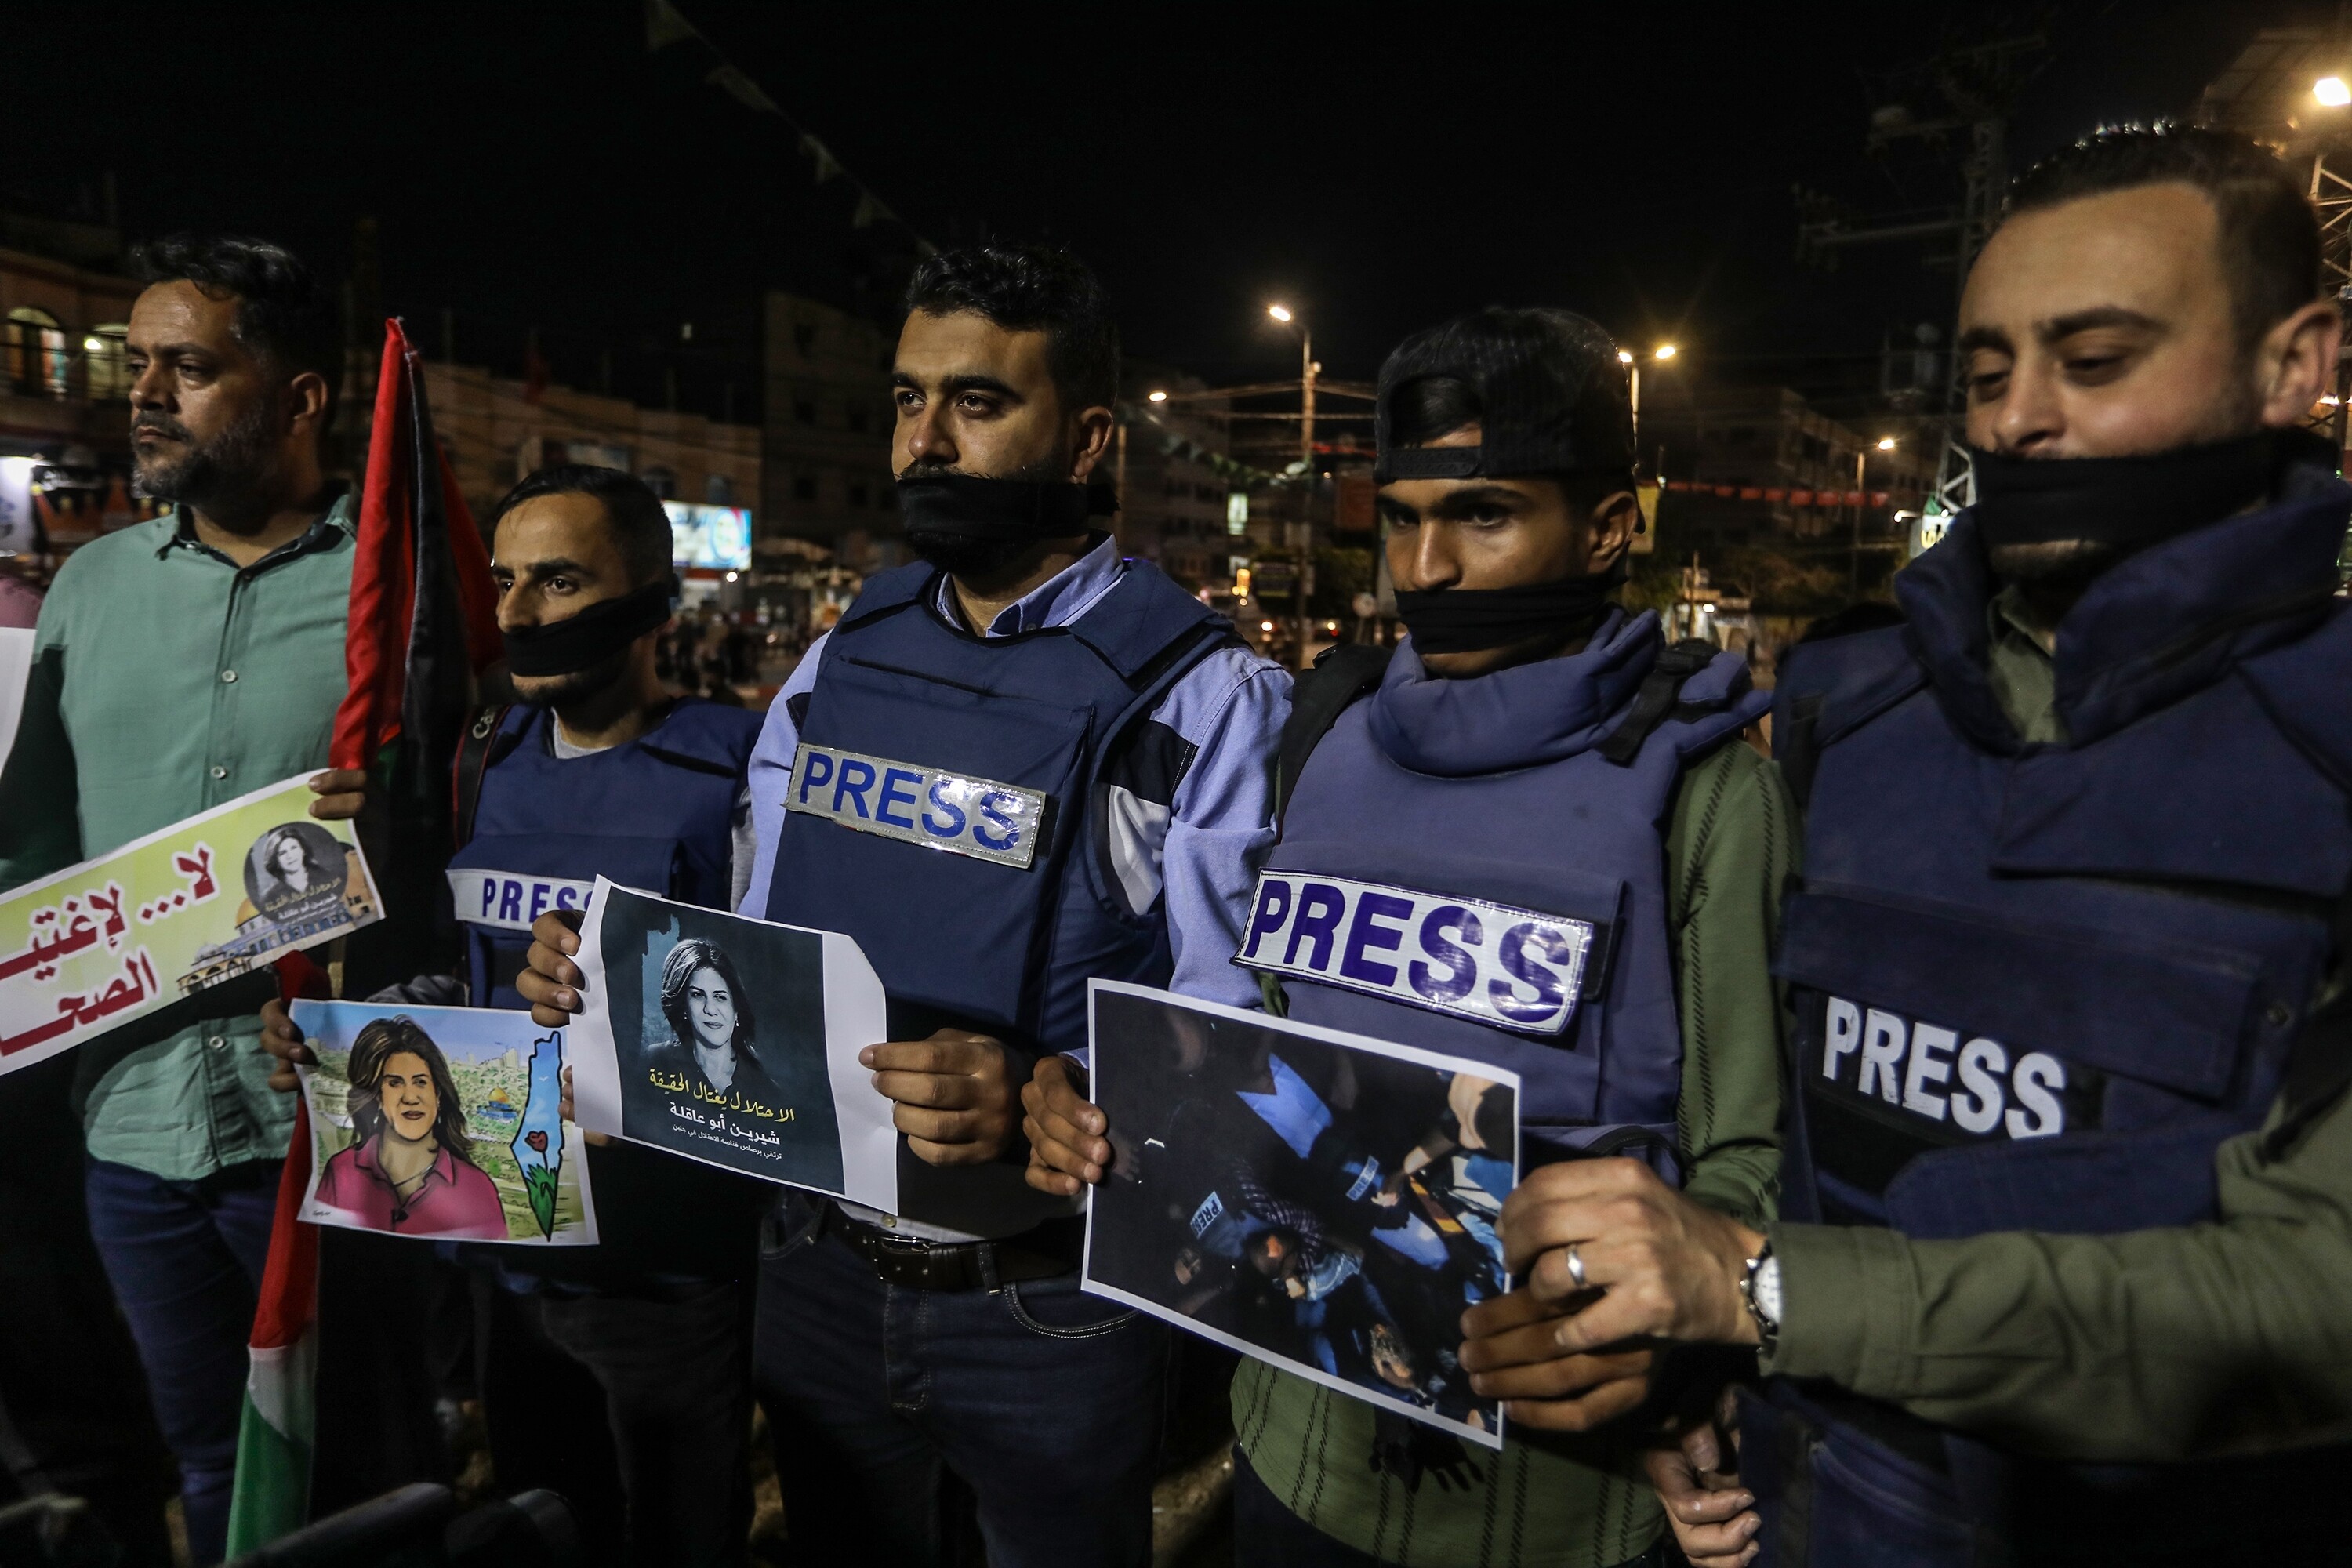 Palestinians take part in a candlelight vigil to condemn the killing of veteran Al Jazeera journalist Shireen Abu Aqleh, in Rafah, in the southern Gaza Strip, on May 11, 2022. (By Anas Mohammed)